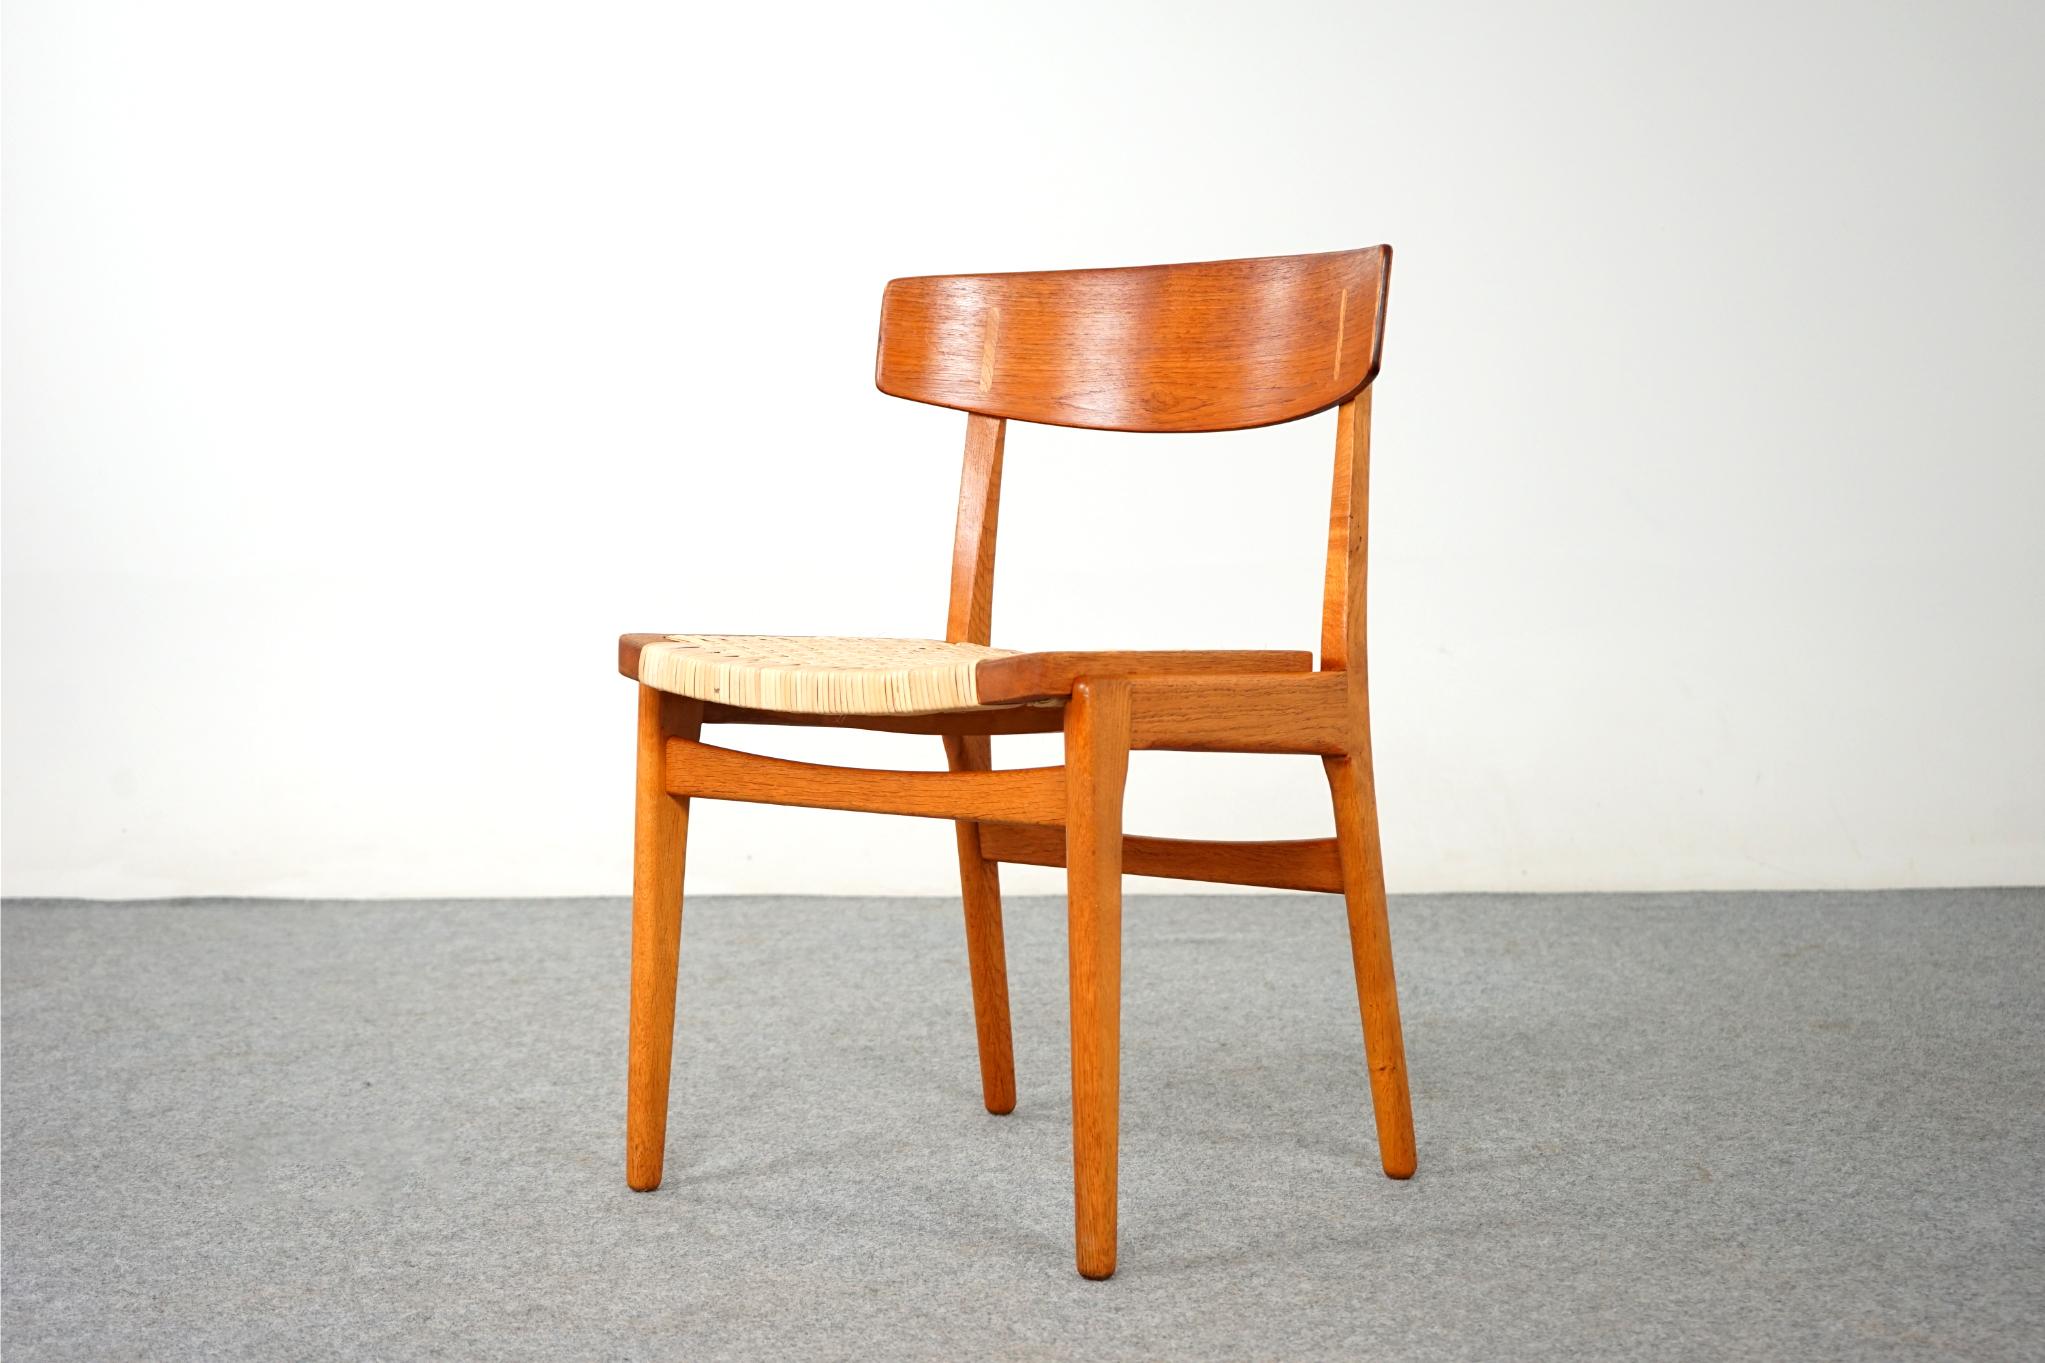 Teak & oak dining chair, circa 1960's. Solid oak frame compliments the beautifully curved teak veneer seatback, with contrasting oak cover caps. Newly woven rattan seat is very comfortable! Excellent construction and quality.